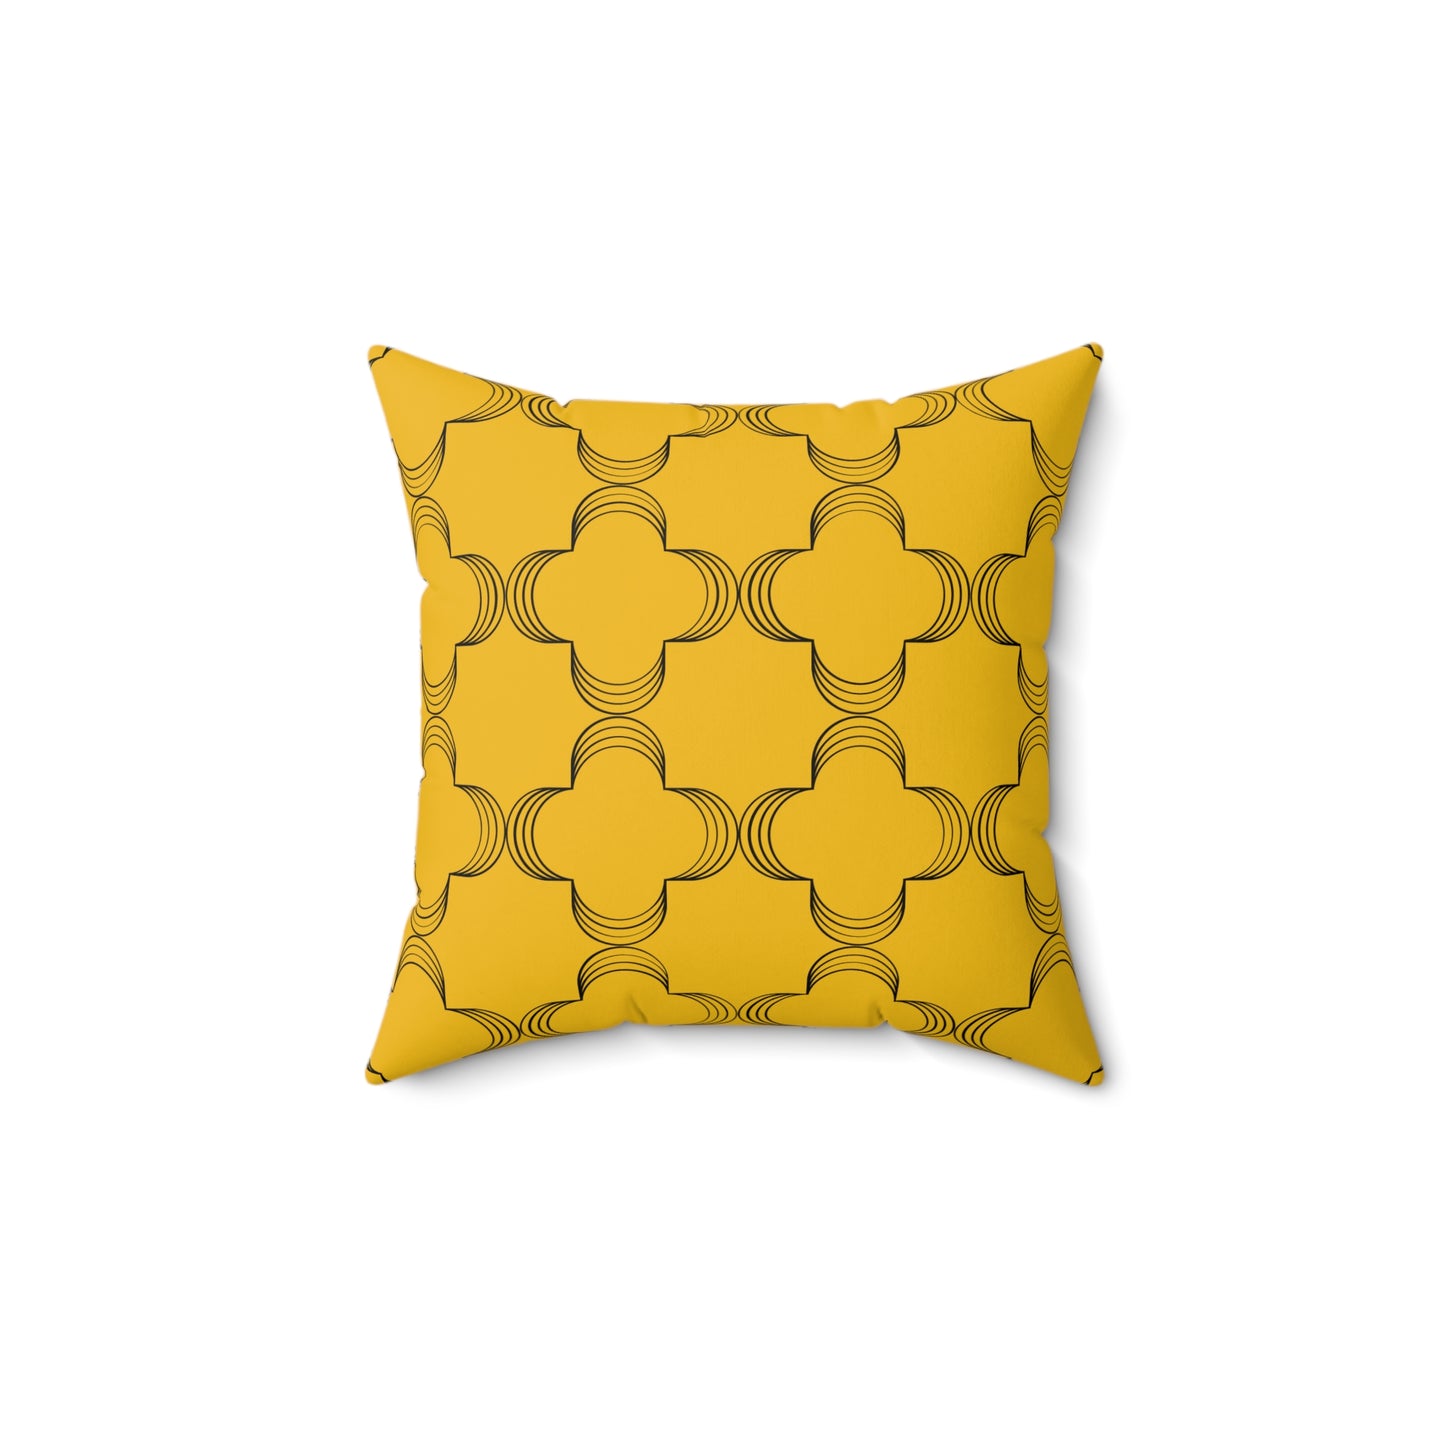 "The Gathering Place" Geometric Throw Pillow